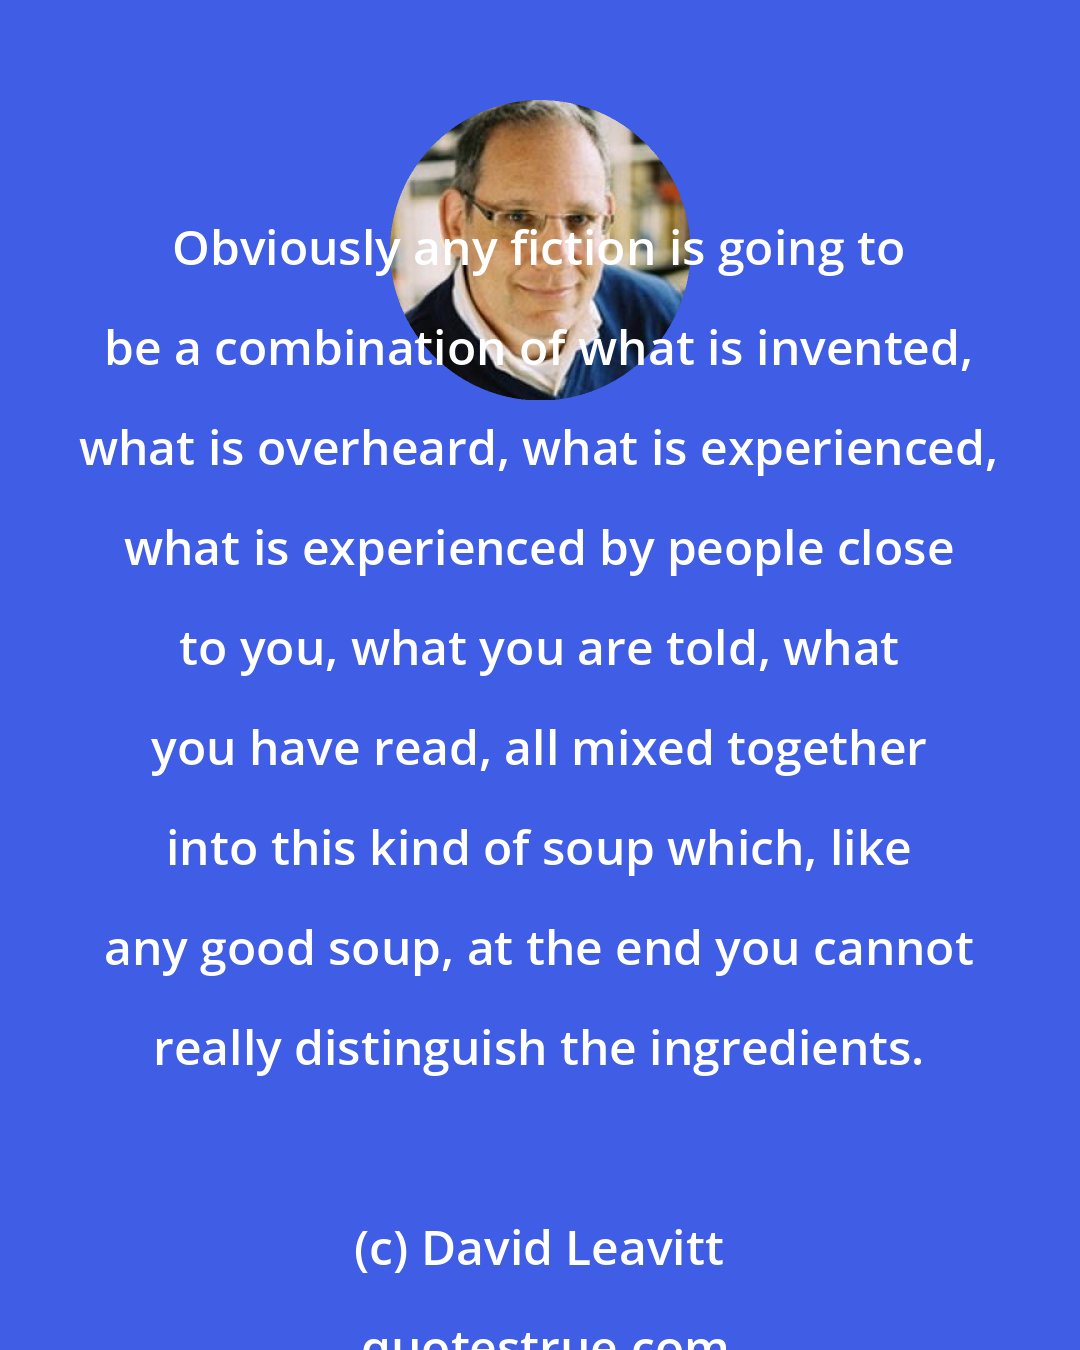 David Leavitt: Obviously any fiction is going to be a combination of what is invented, what is overheard, what is experienced, what is experienced by people close to you, what you are told, what you have read, all mixed together into this kind of soup which, like any good soup, at the end you cannot really distinguish the ingredients.